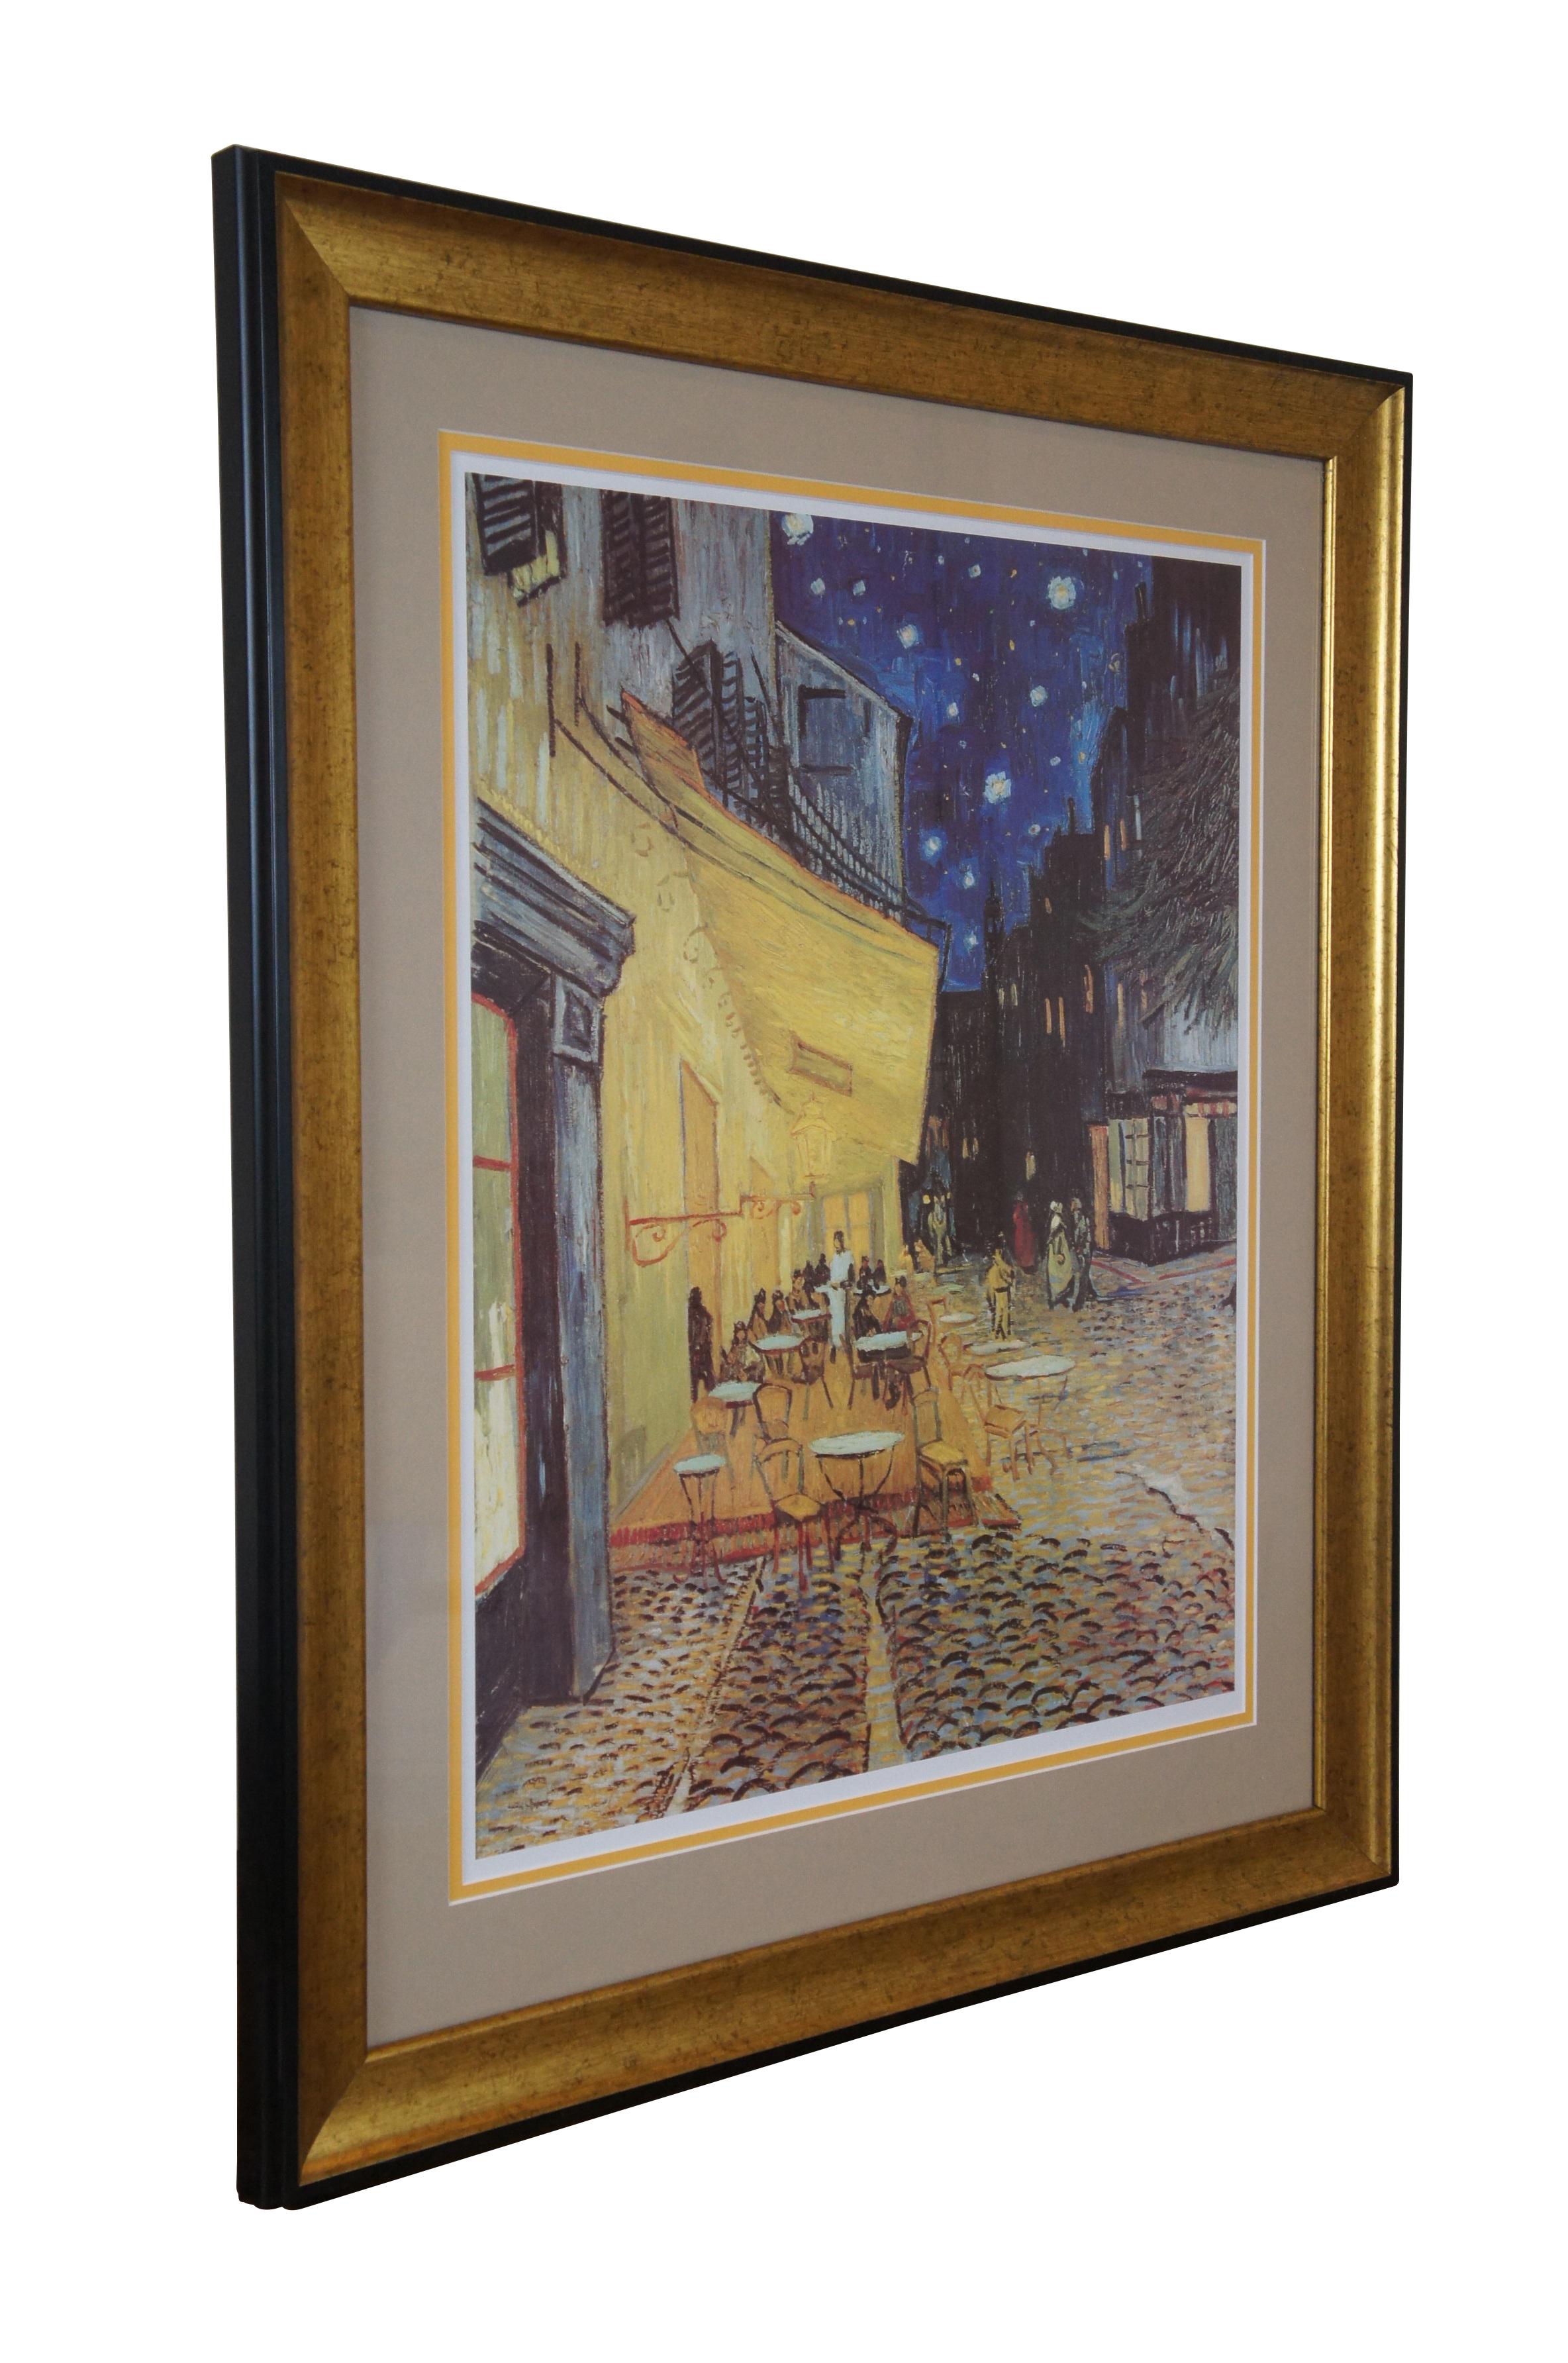 Vincent Van Gogh Cafe Terrace at Night - Lithographie - Paysage urbain 29